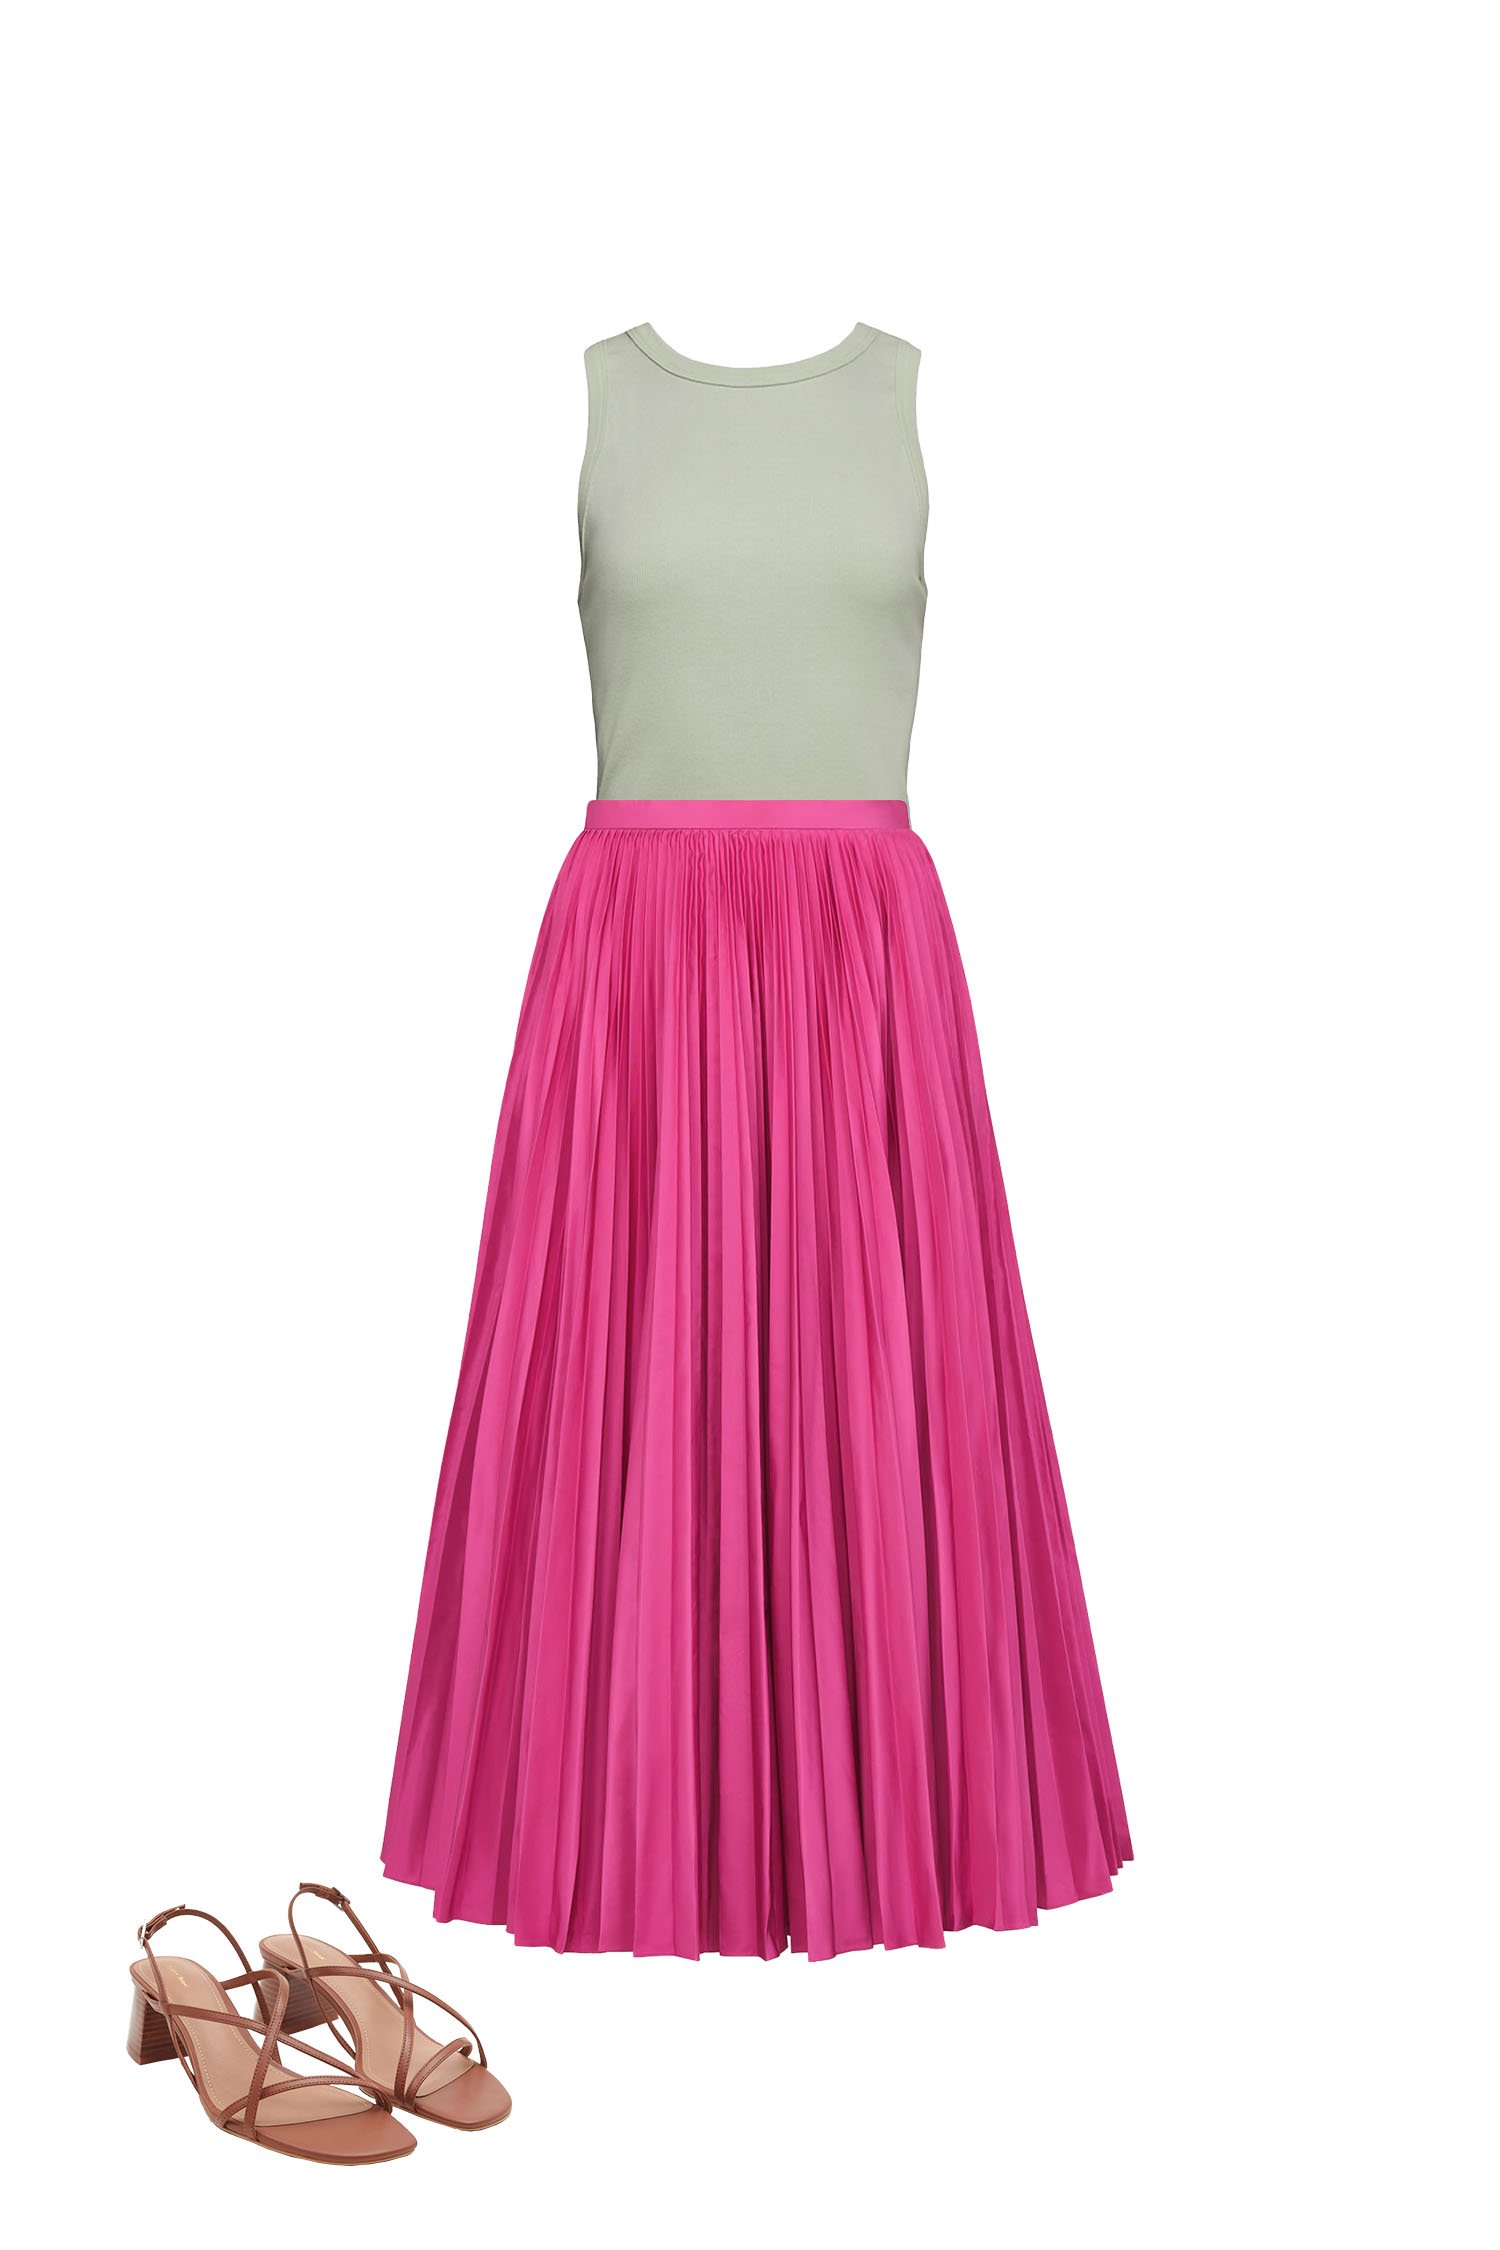 Hot Pink Pleated Skirt with Sage Green Tank Top Outfit